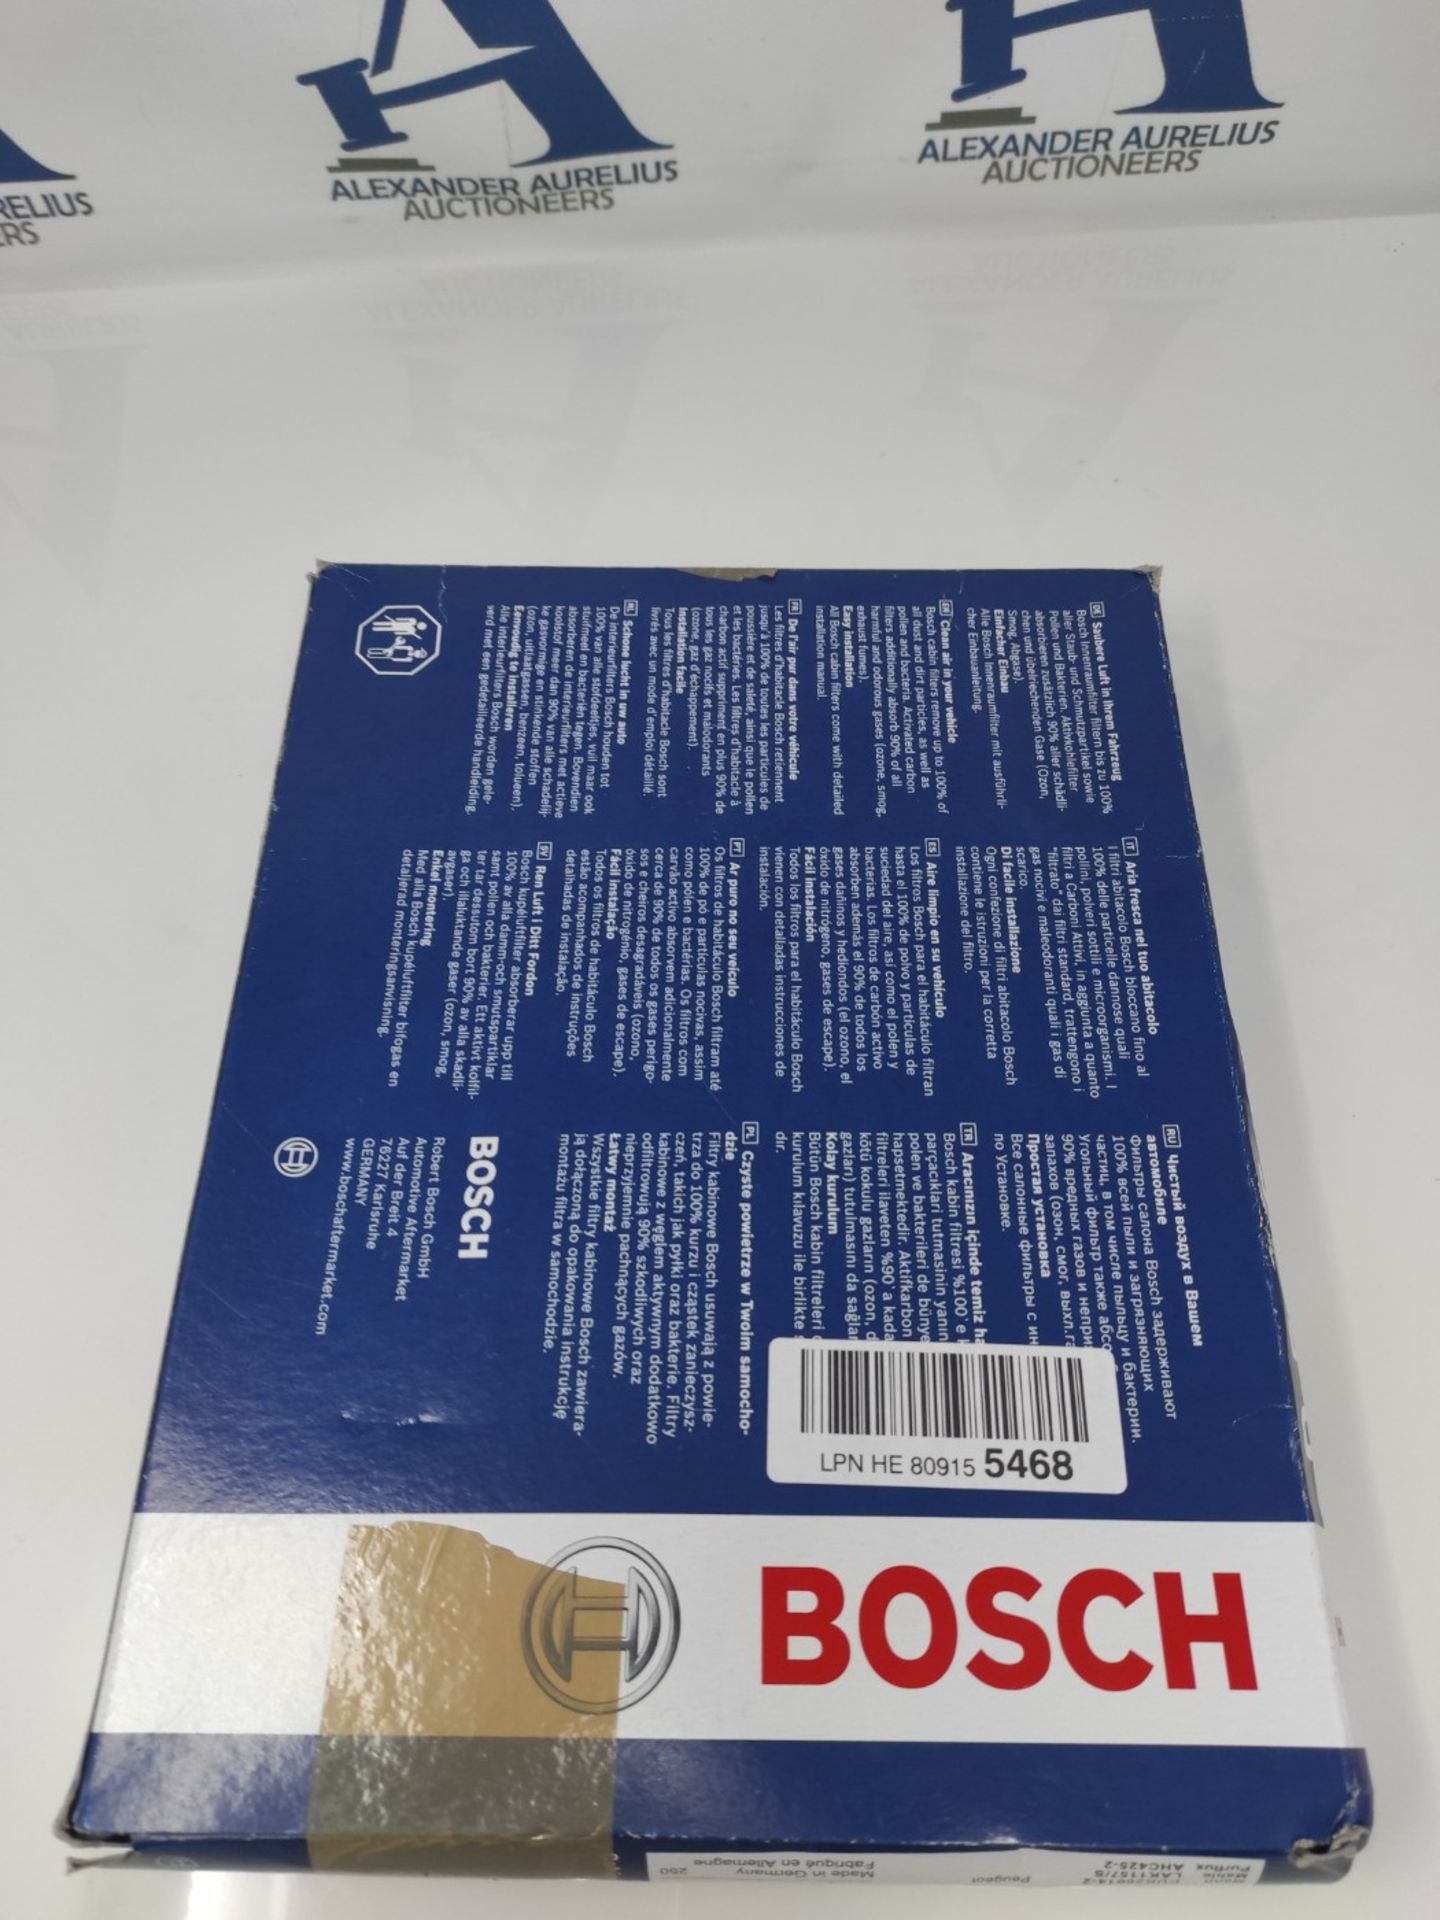 Bosch R5525 - Cabin filter with activated charcoal anti-odour feature - dust and polle - Image 3 of 3